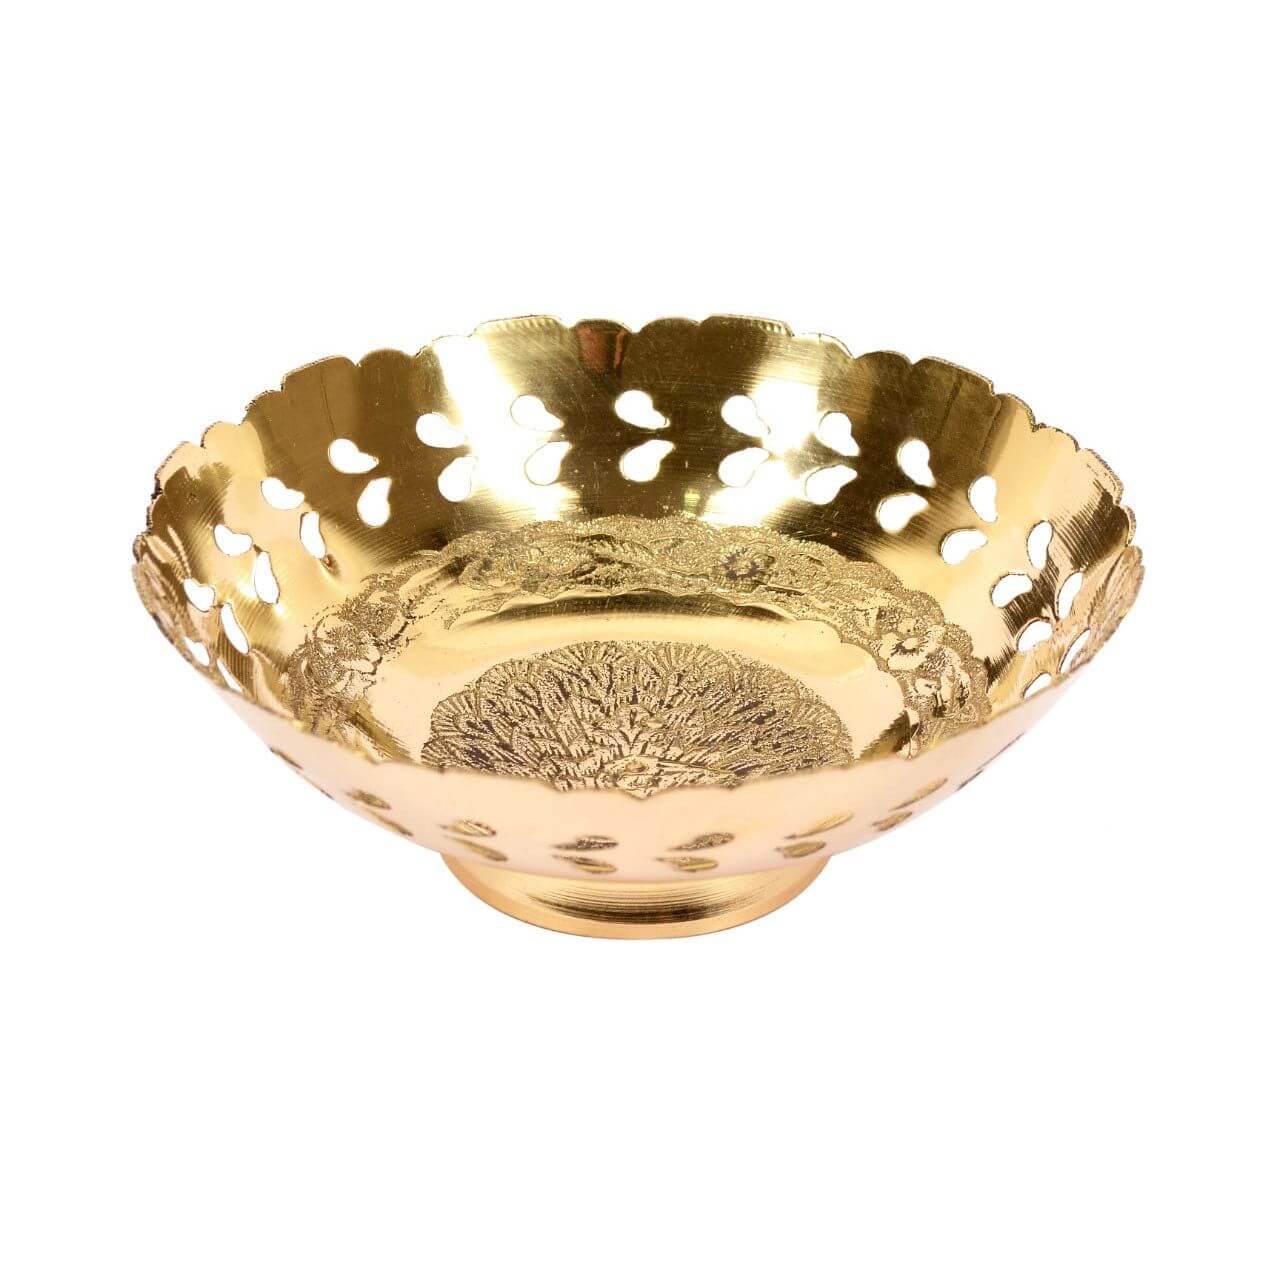 Metal Brass Hand Crafted Fruit Bowl (Gold Color, 6 Inch Diameter, 2 Inch Height)